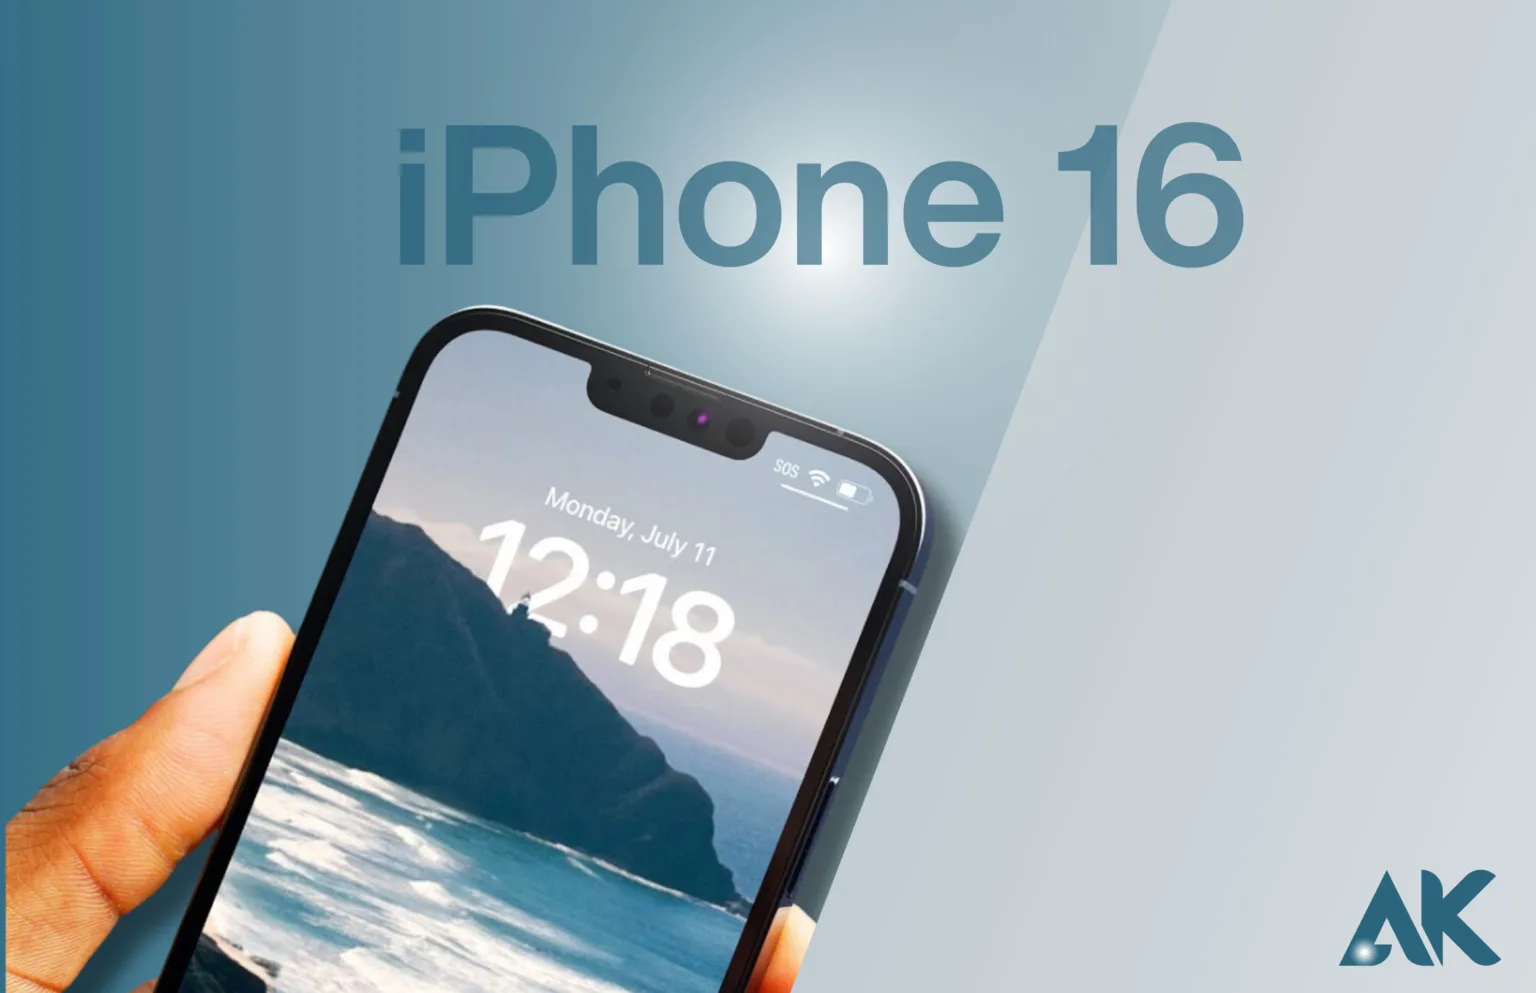 What's New in iPhone 16?